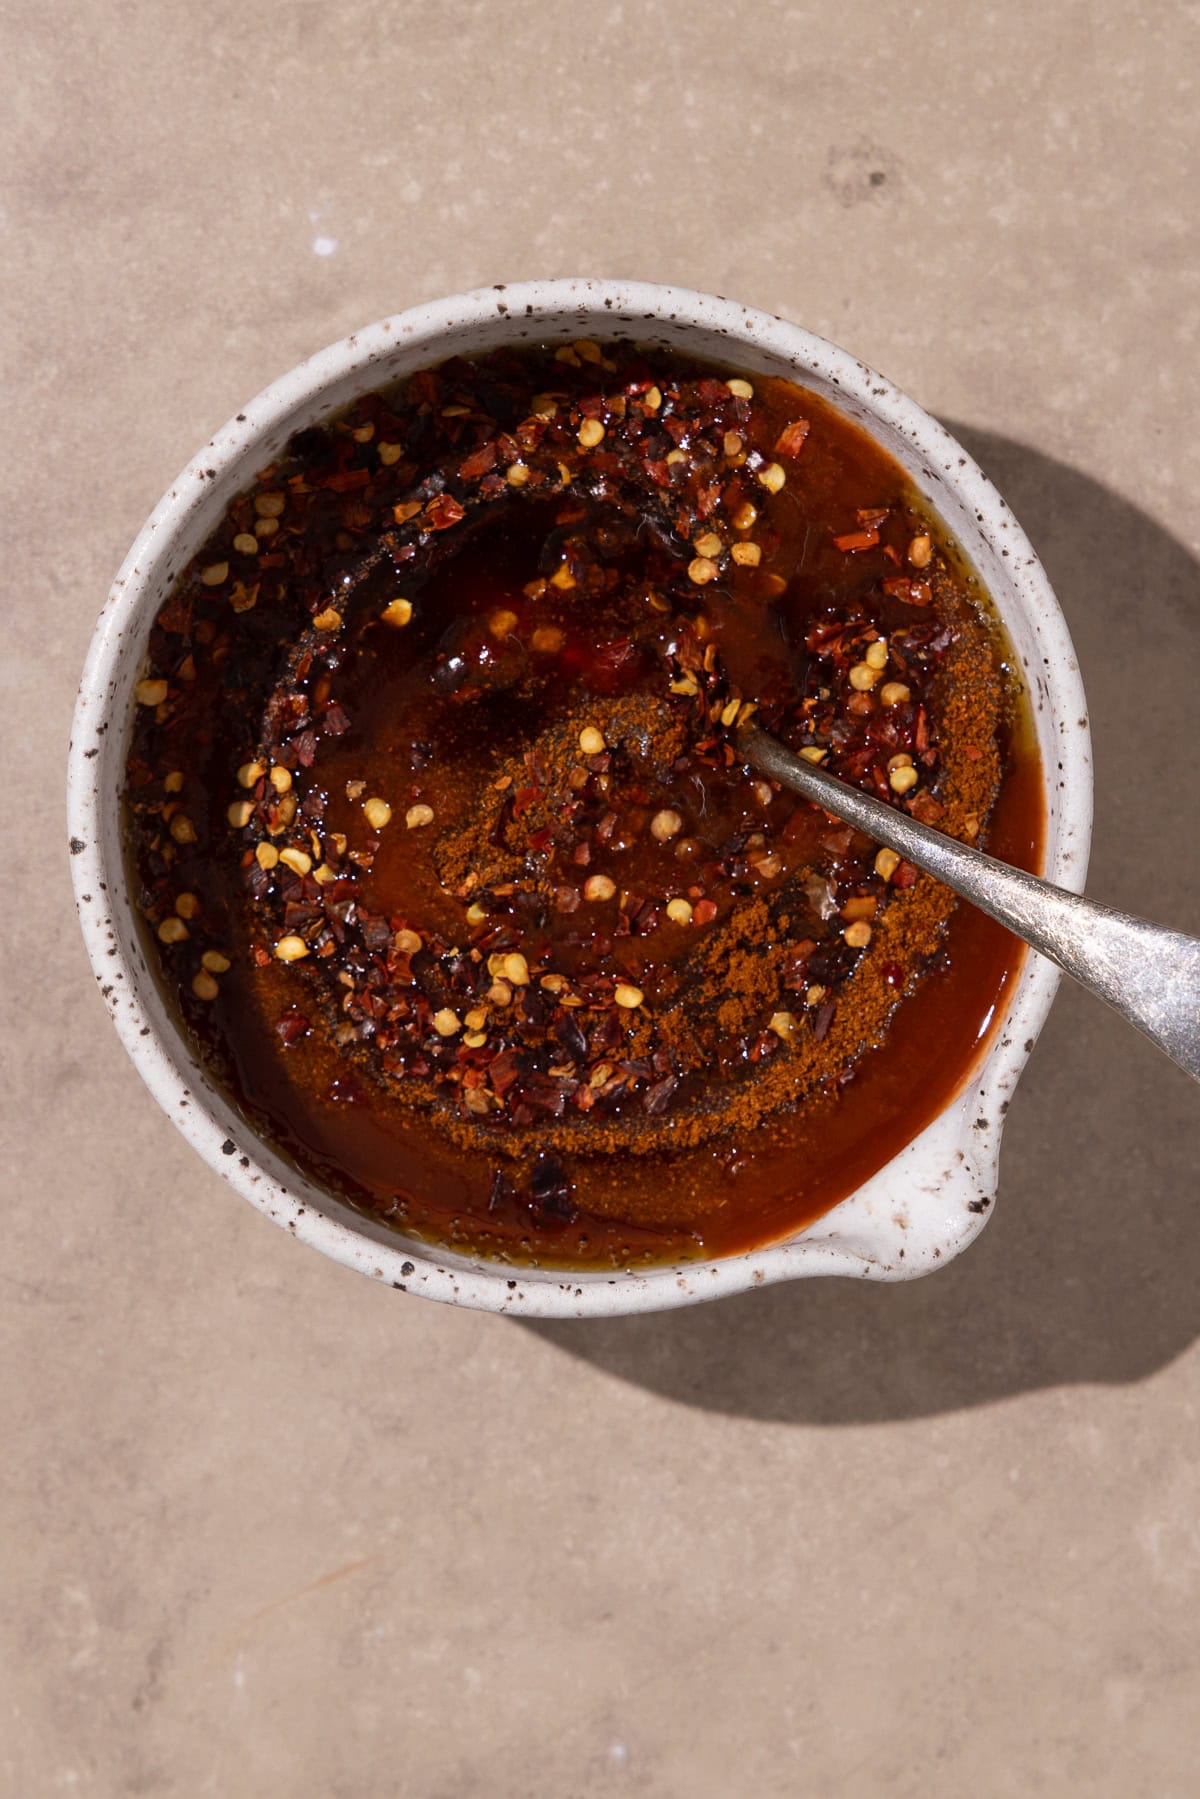 Hot honey ingredients mixed together in a small bowl with a spoon.